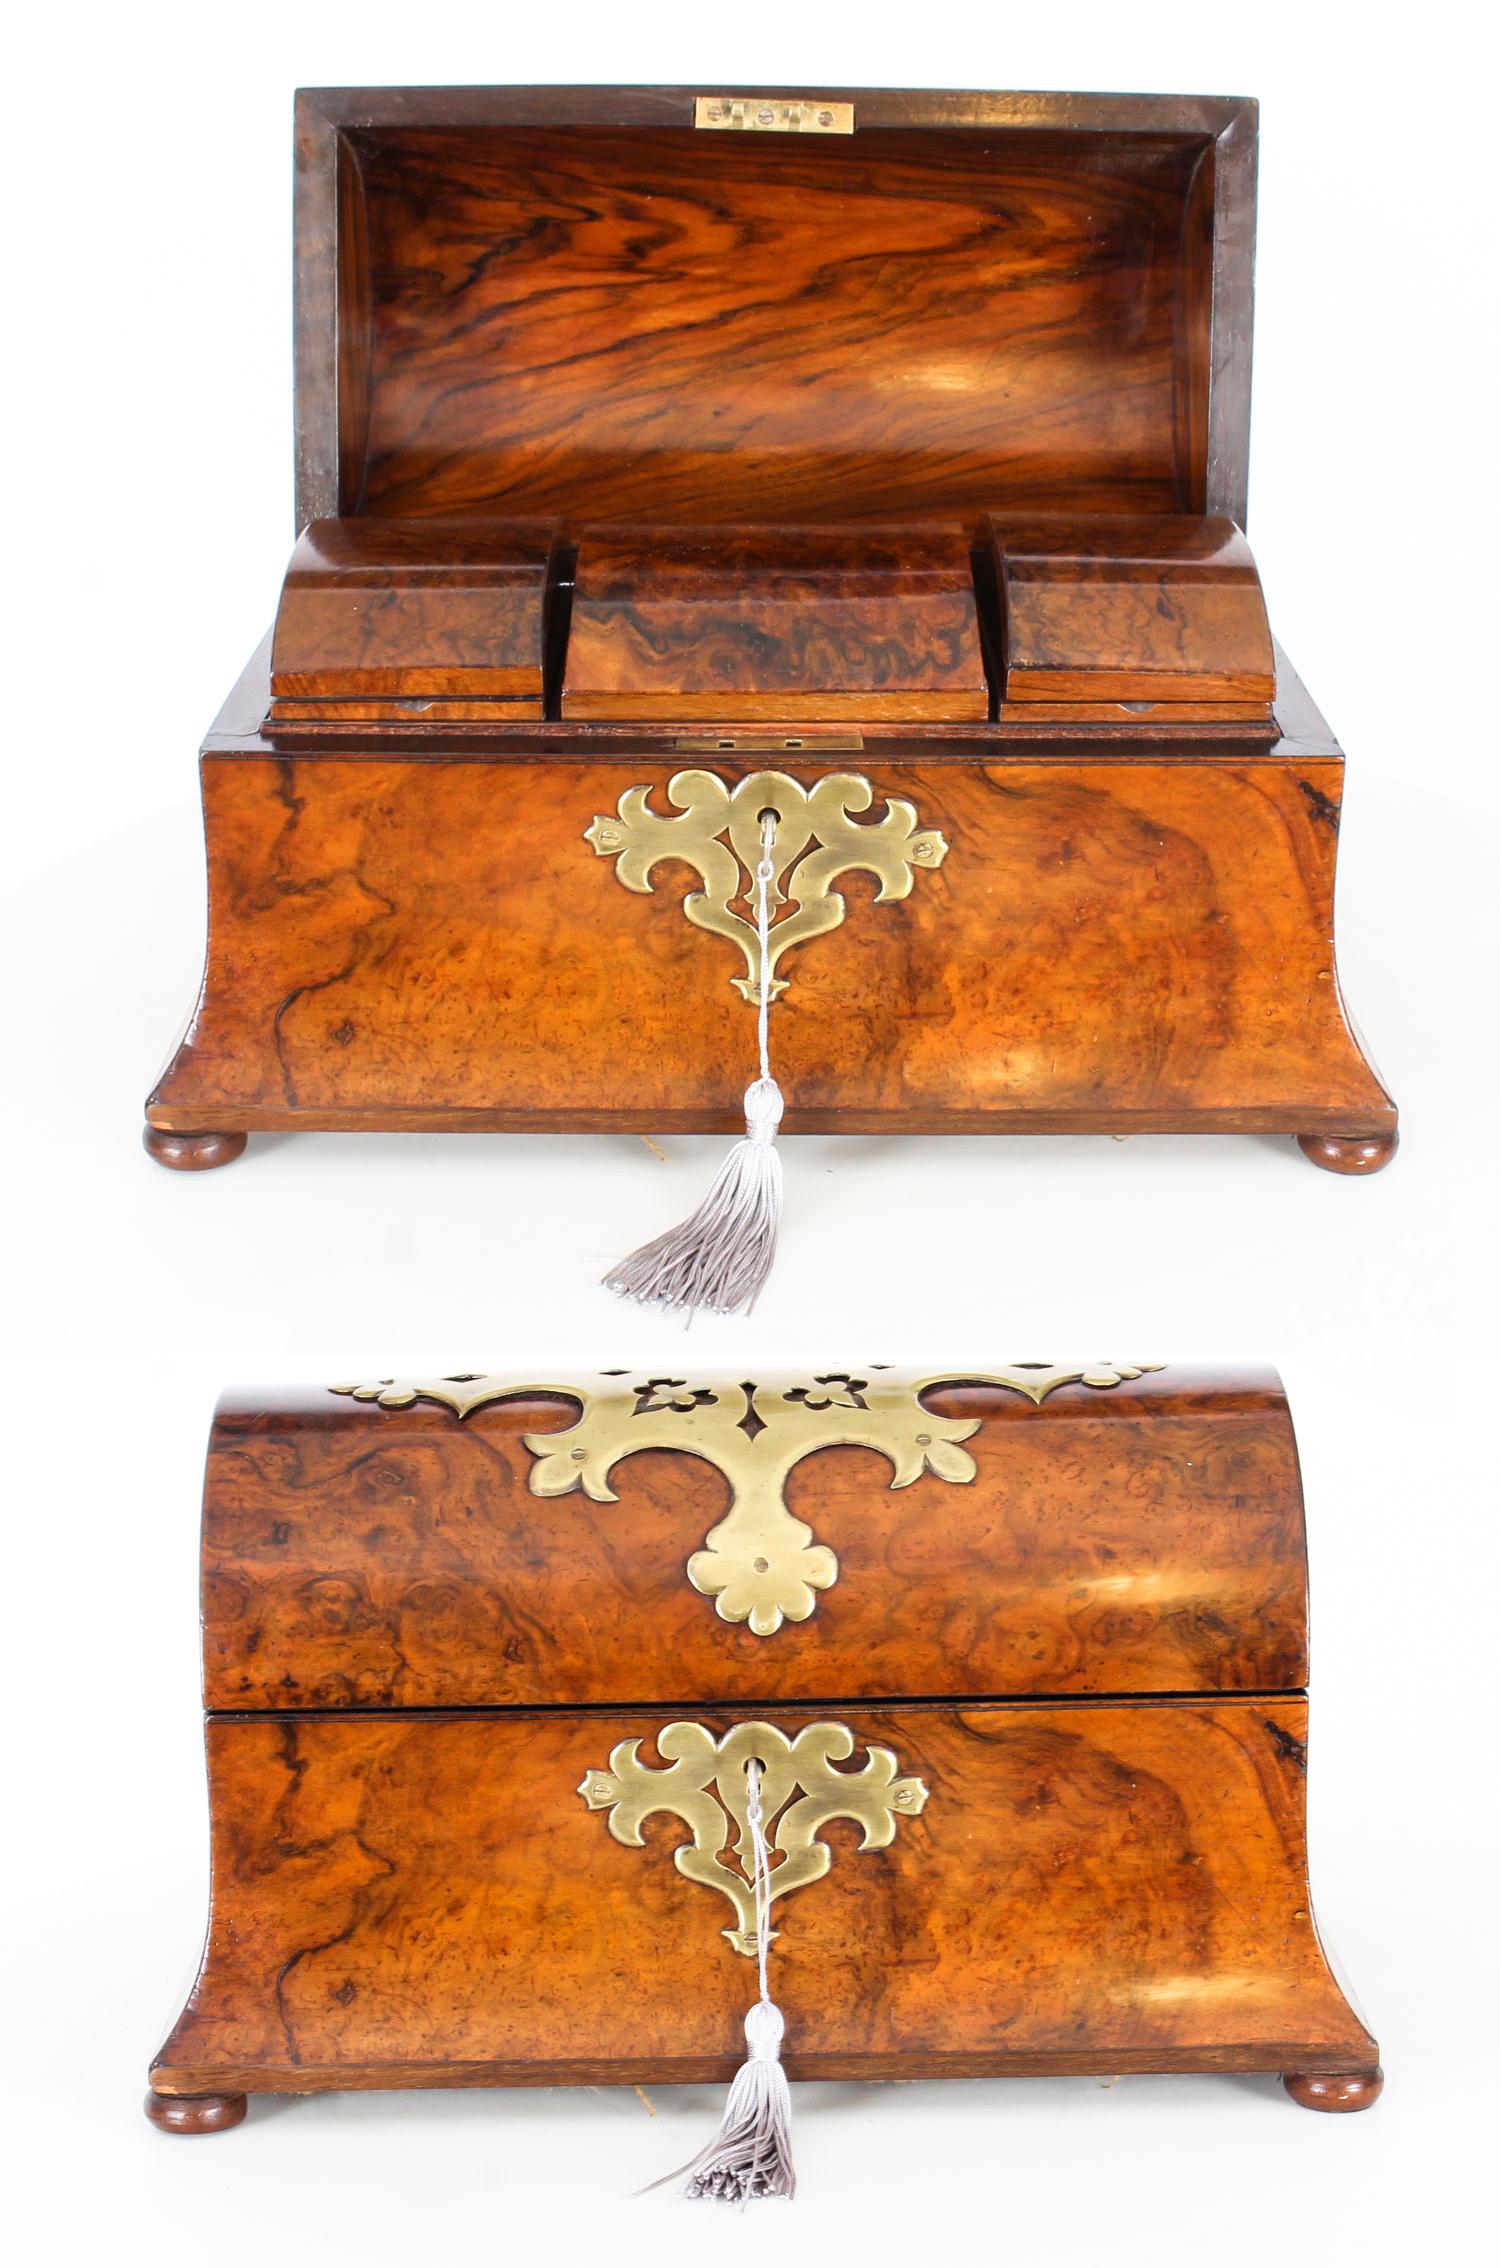 This is an exquisite antique Scottish Victorian domed top tea caddy, circa 1860 in date.

It is beautifully decorated with cut brass decoration to the burr walnut.
 
The box has a hinged top which opens to reveal three beautiful lidded